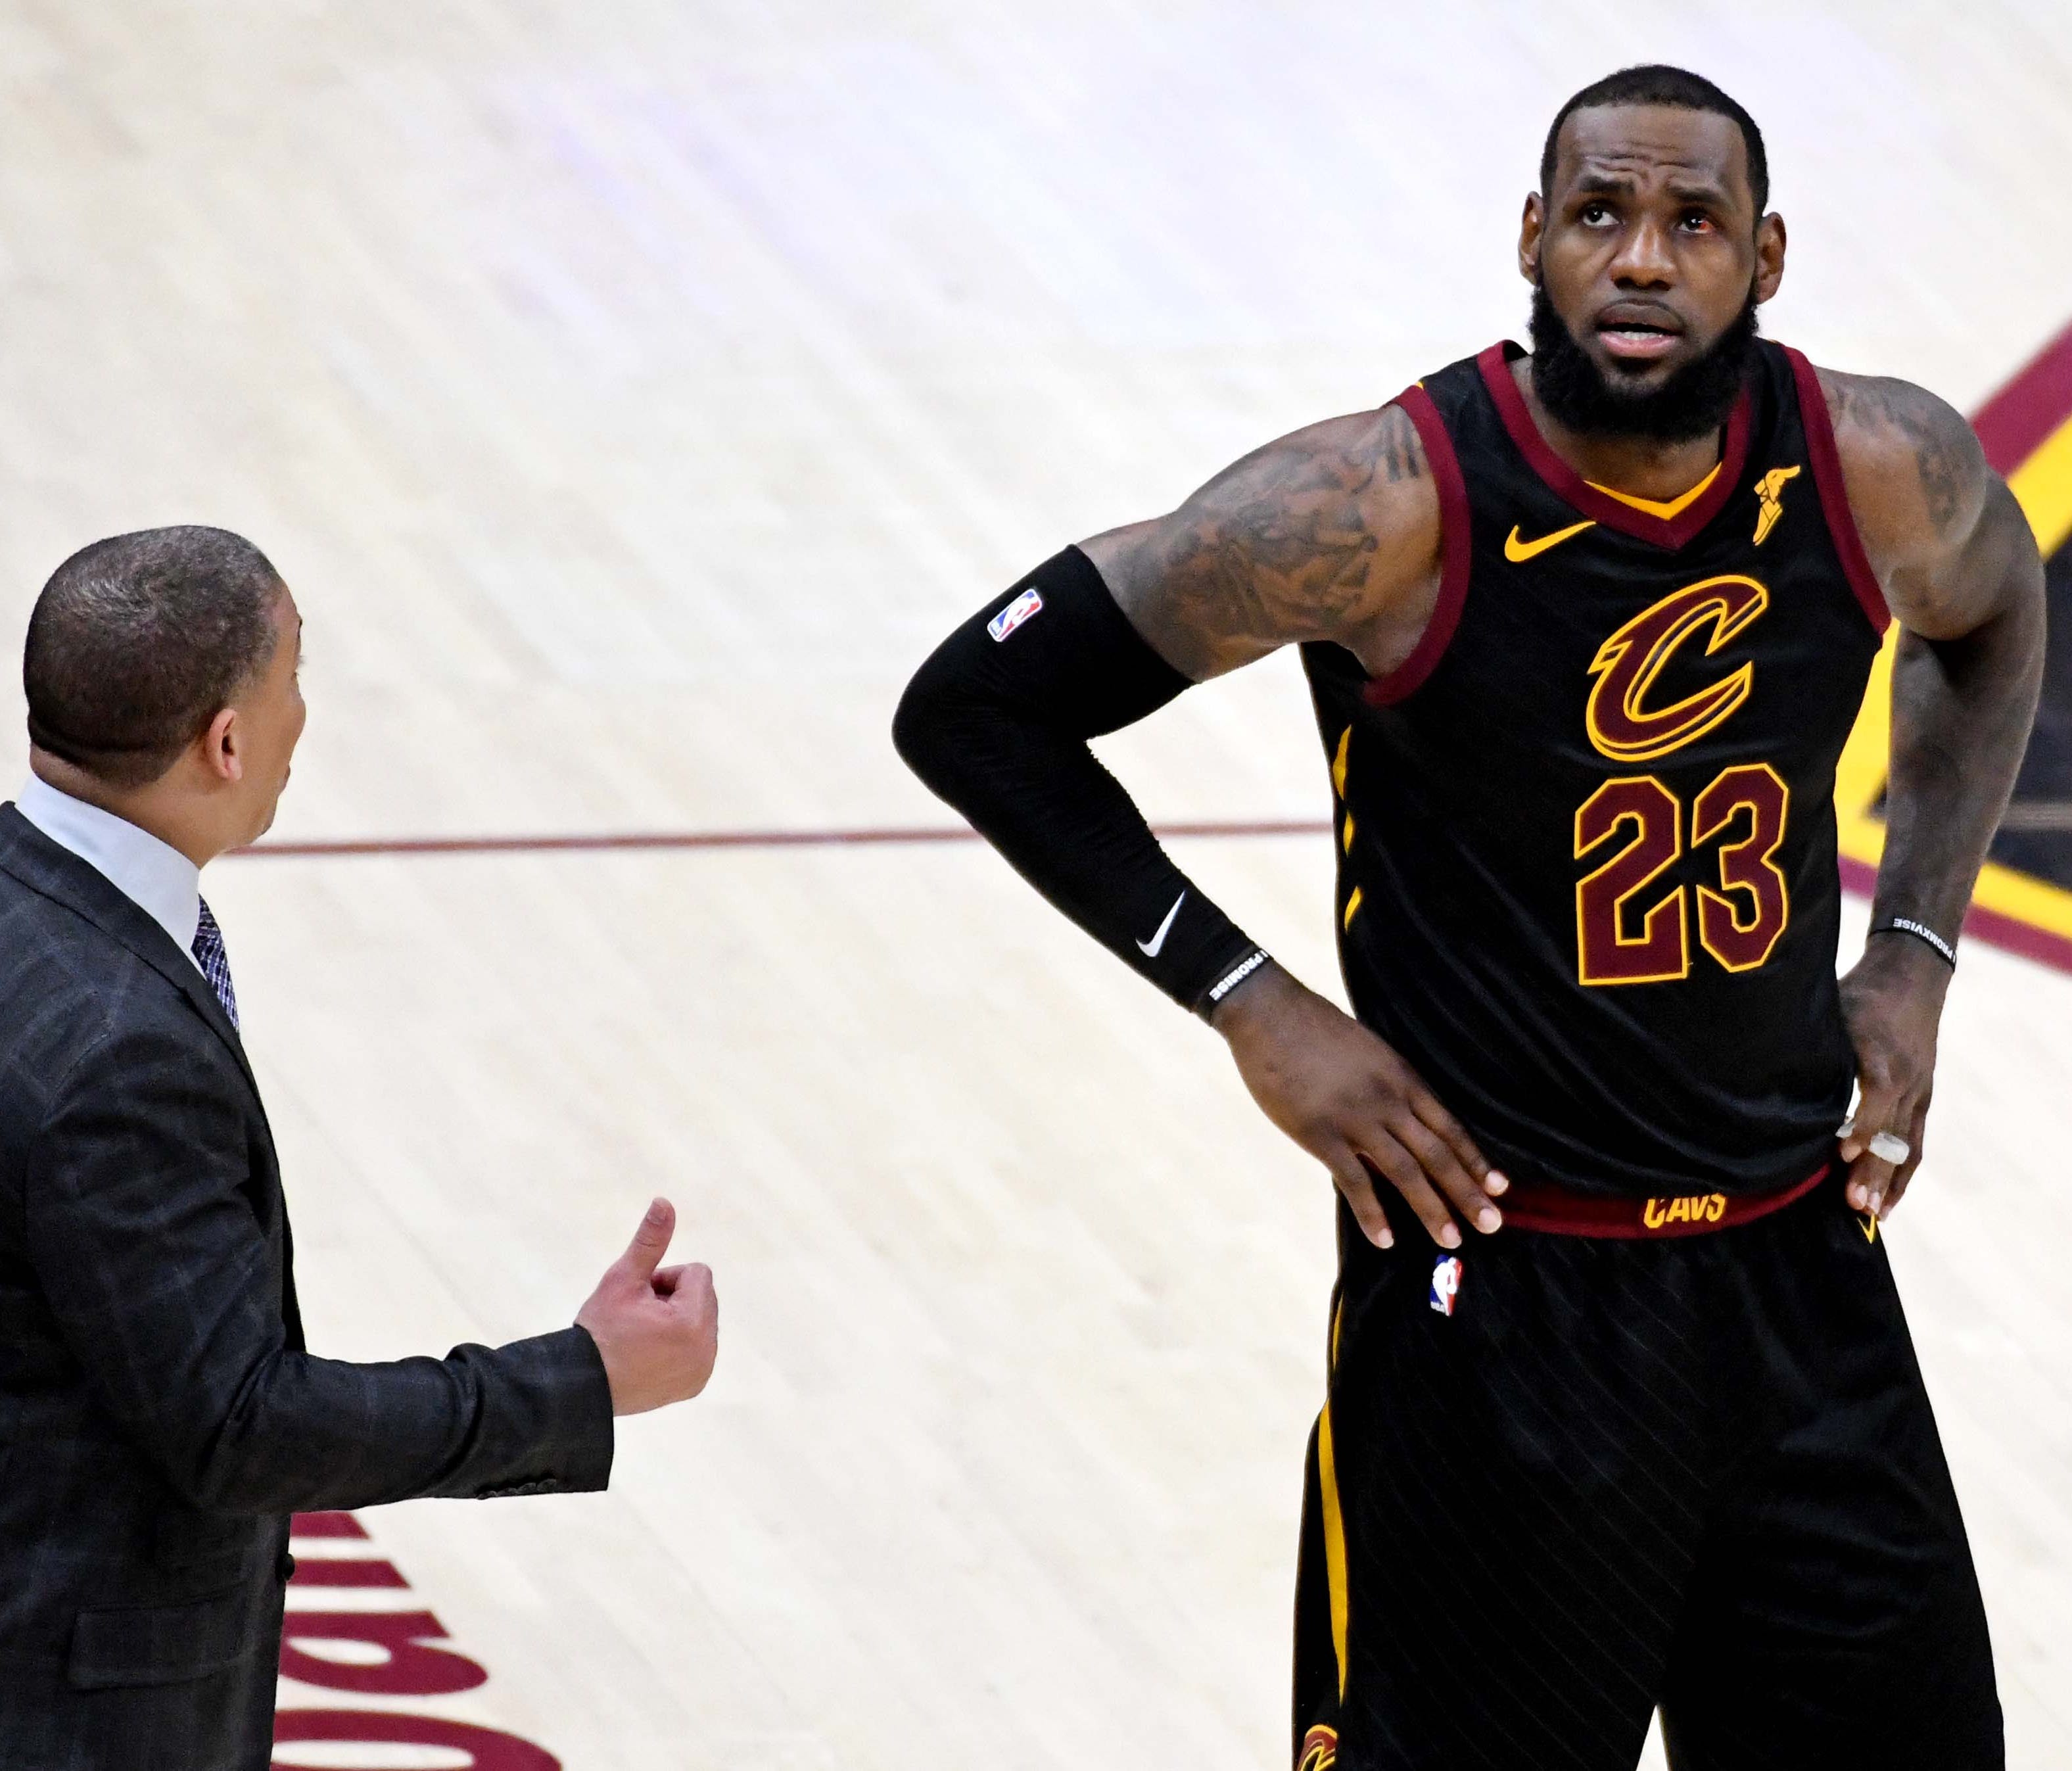 Cleveland Cavaliers forward LeBron James during the fourth quarter in Game 3 of the 2018 NBA Finals.